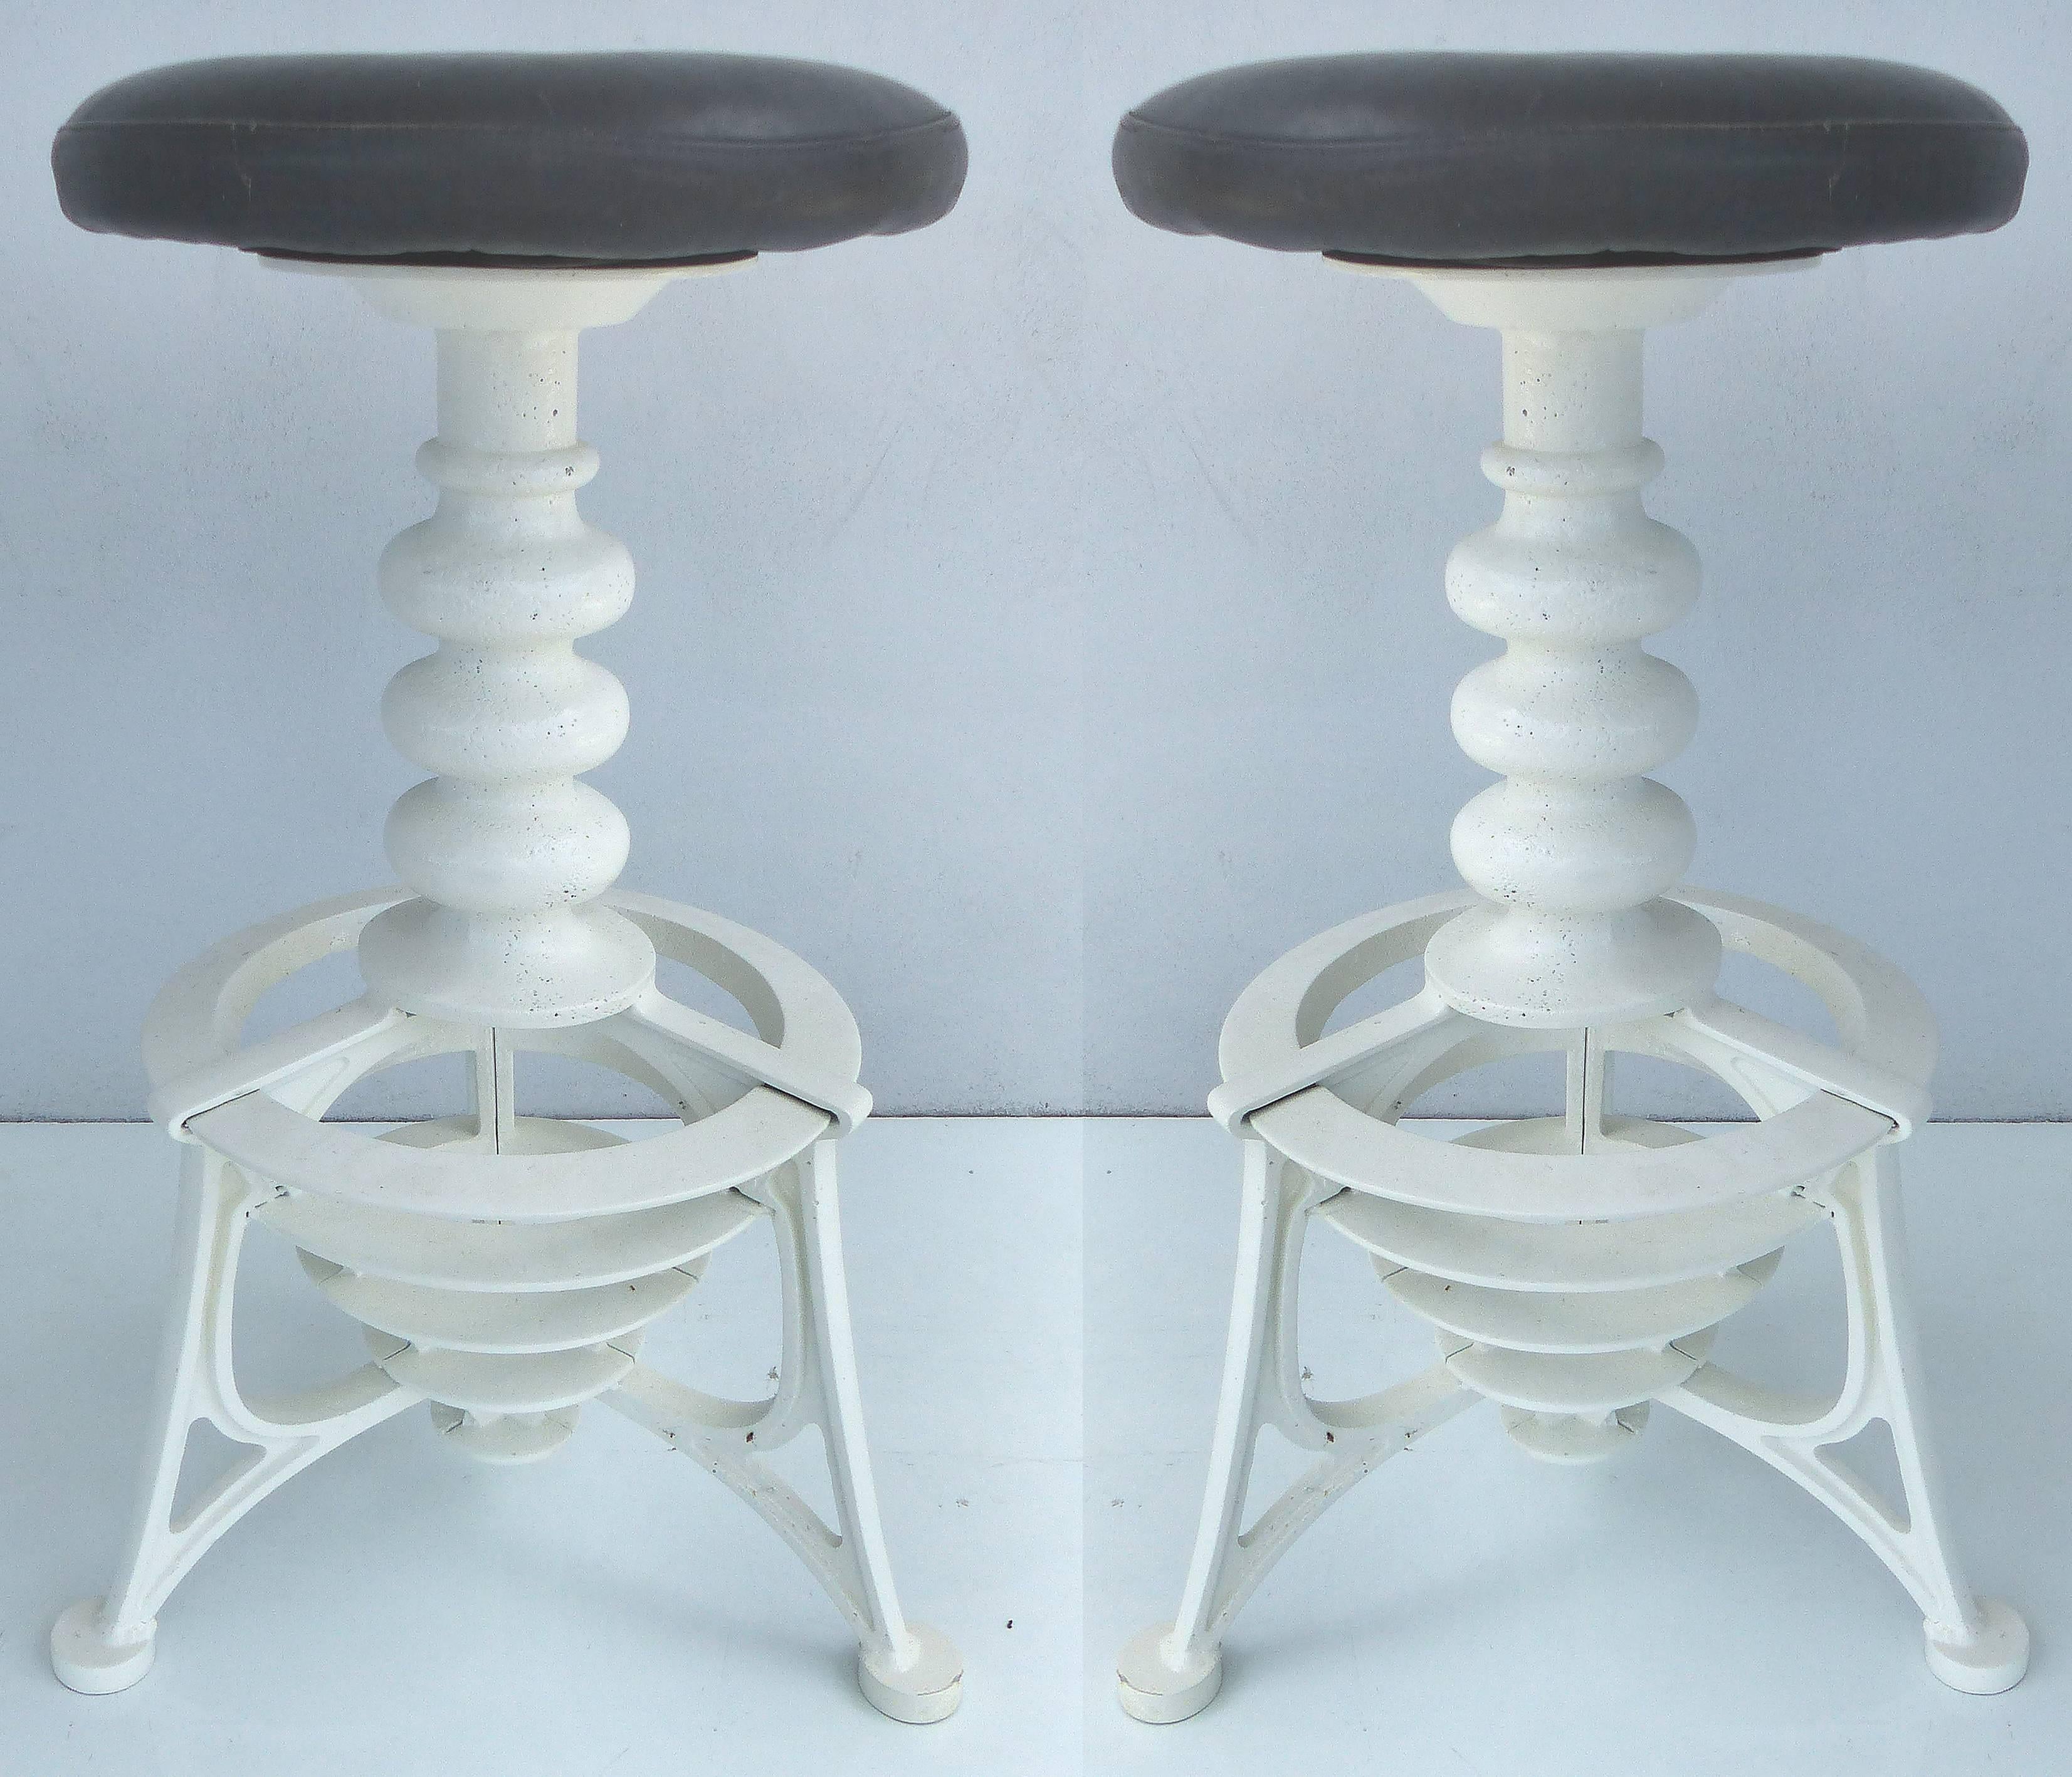 20th Century Industrial Cast Iron Interchangeable Stools to Tables

A pair of early 20th century Industrial cast iron stools that have interchangeable tabletops. The original leather swivel seats can be exchanged for custom fitted steel tabletops